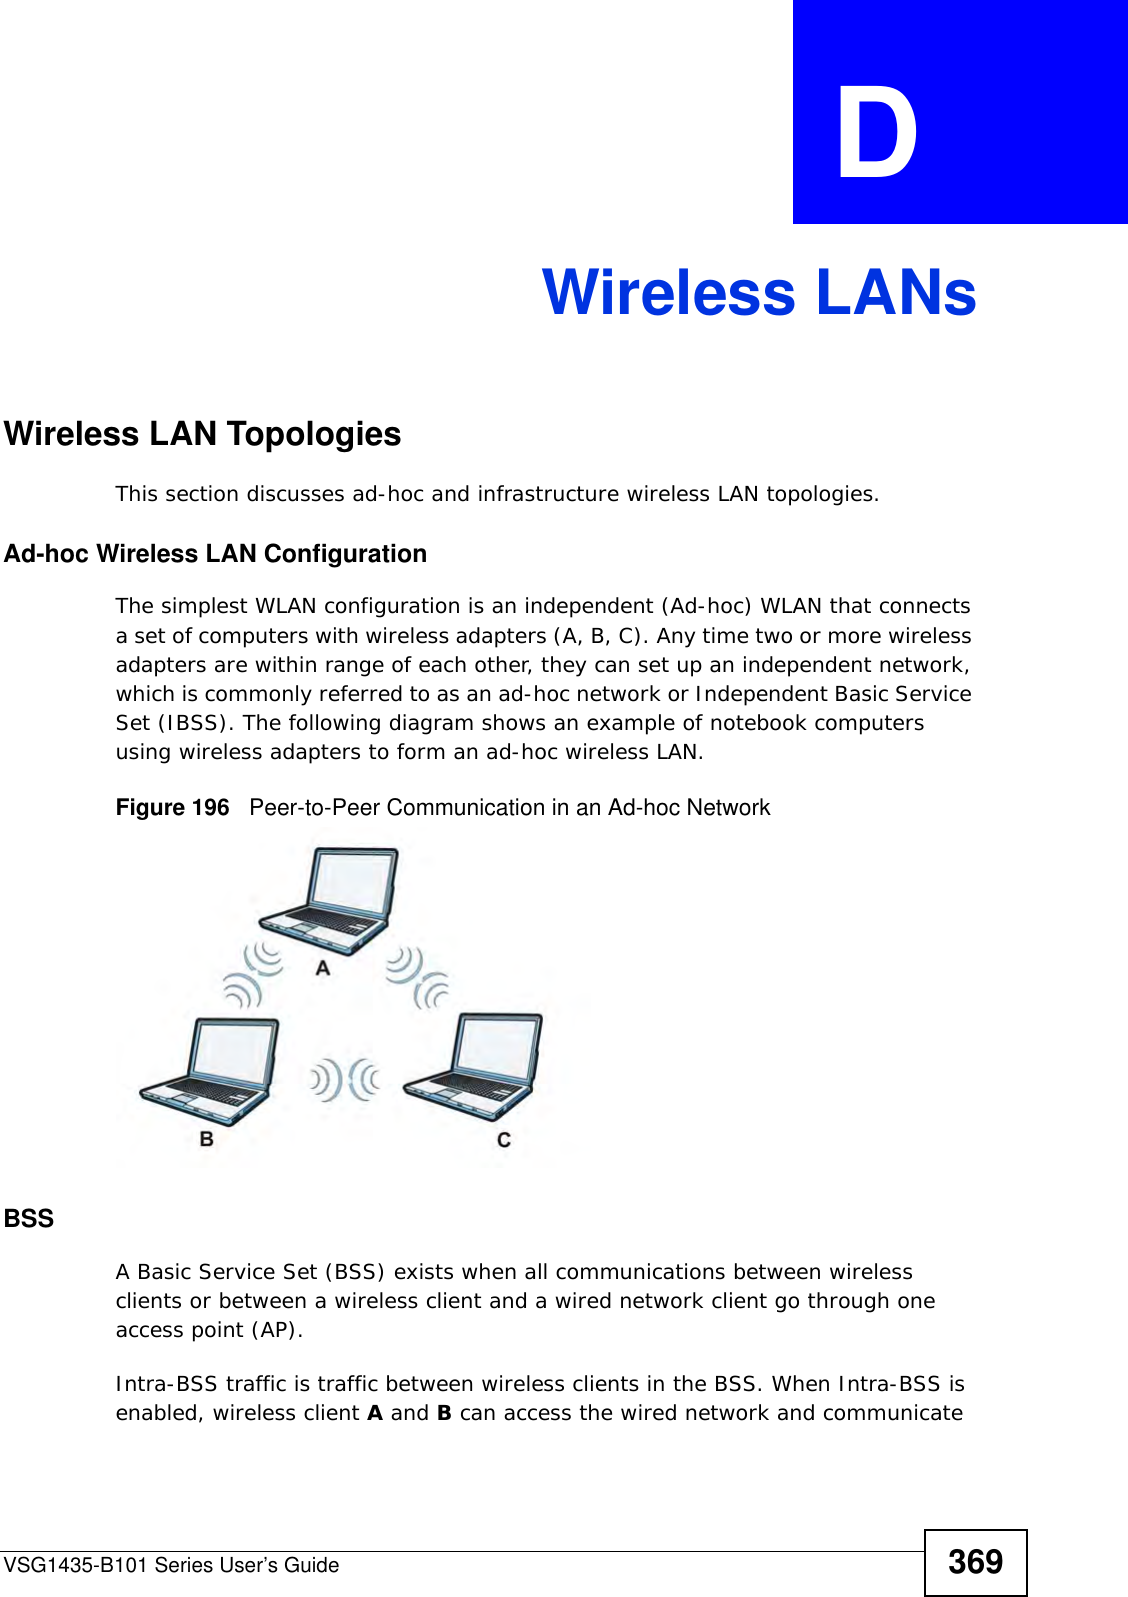 VSG1435-B101 Series User’s Guide 369APPENDIX  D Wireless LANsWireless LAN TopologiesThis section discusses ad-hoc and infrastructure wireless LAN topologies.Ad-hoc Wireless LAN ConfigurationThe simplest WLAN configuration is an independent (Ad-hoc) WLAN that connects a set of computers with wireless adapters (A, B, C). Any time two or more wireless adapters are within range of each other, they can set up an independent network, which is commonly referred to as an ad-hoc network or Independent Basic Service Set (IBSS). The following diagram shows an example of notebook computers using wireless adapters to form an ad-hoc wireless LAN. Figure 196   Peer-to-Peer Communication in an Ad-hoc NetworkBSSA Basic Service Set (BSS) exists when all communications between wireless clients or between a wireless client and a wired network client go through one access point (AP). Intra-BSS traffic is traffic between wireless clients in the BSS. When Intra-BSS is enabled, wireless client A and B can access the wired network and communicate 